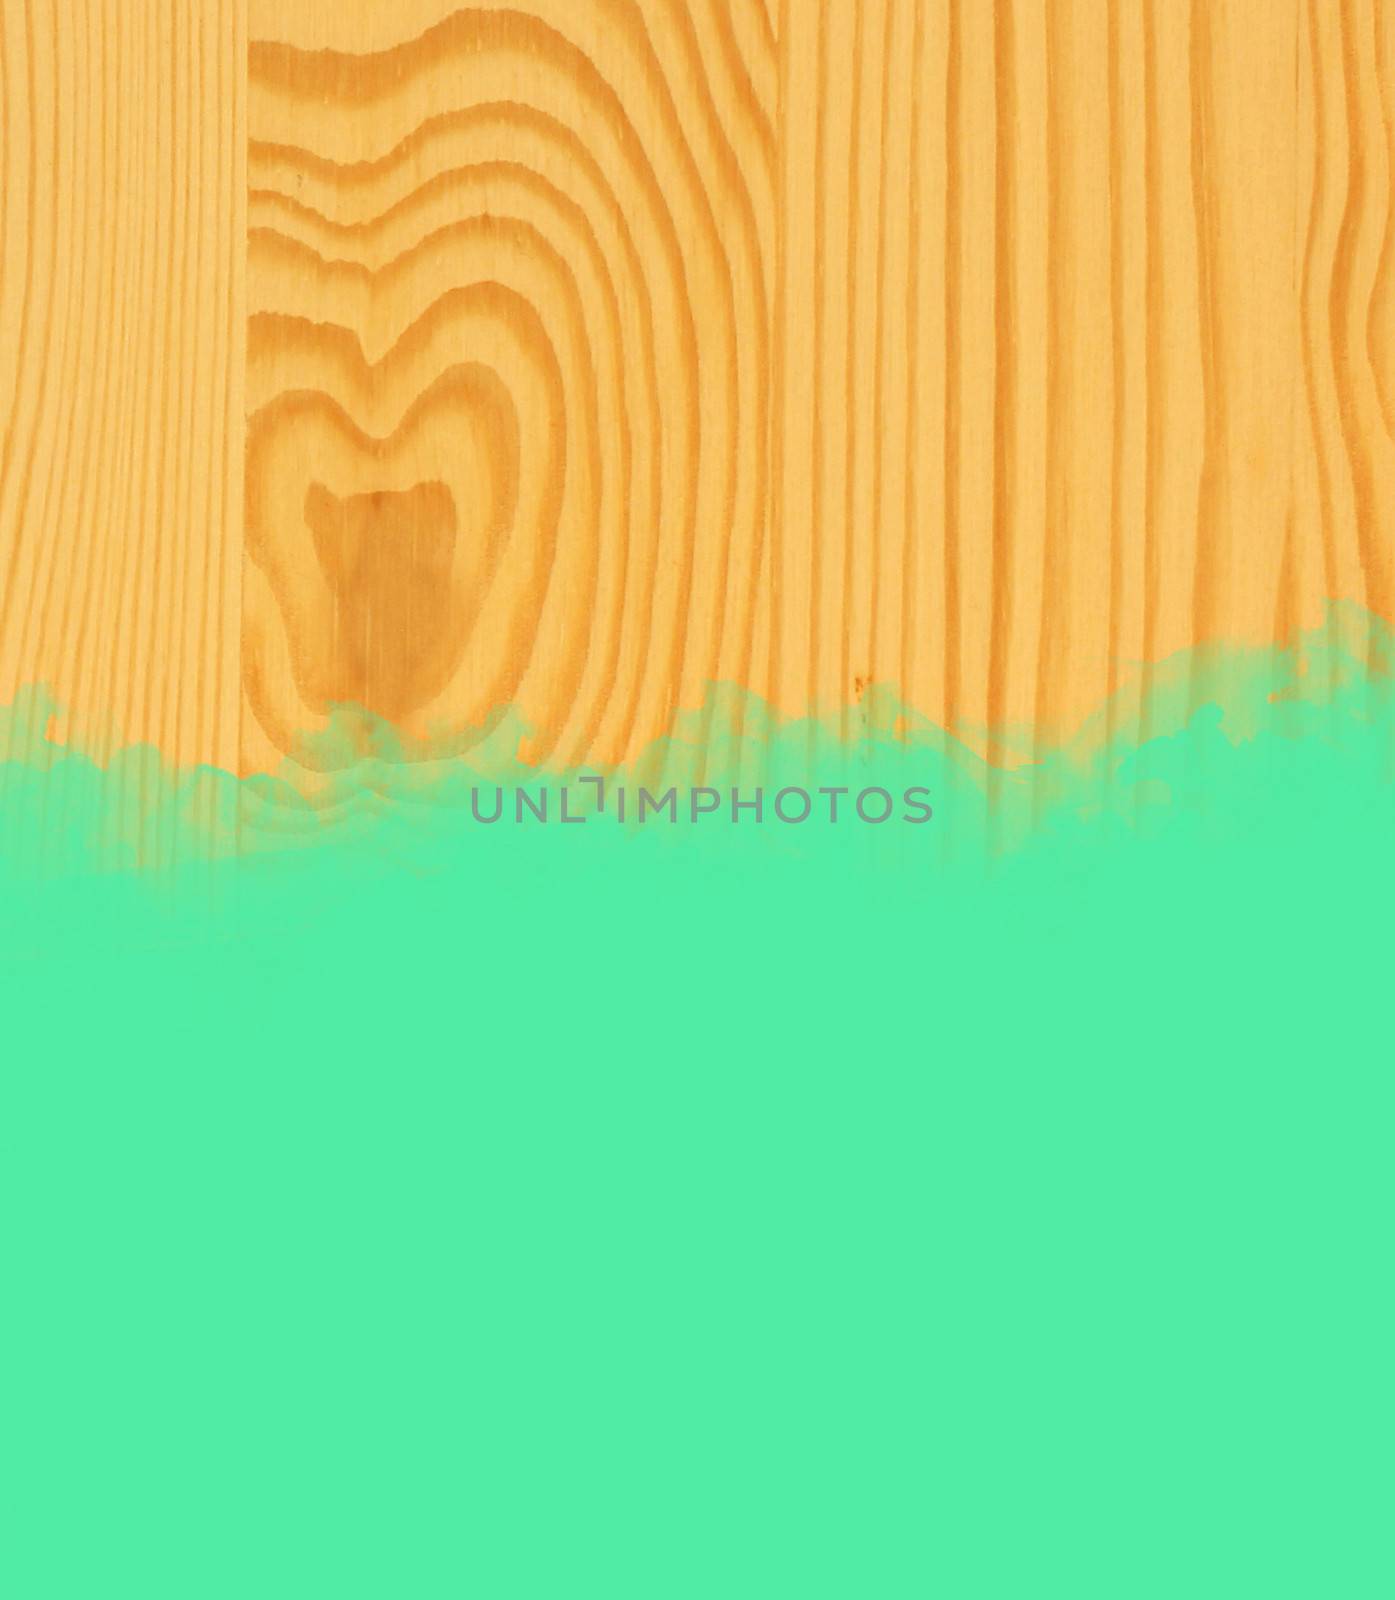 Green stroke of the paint brush on wooden background 